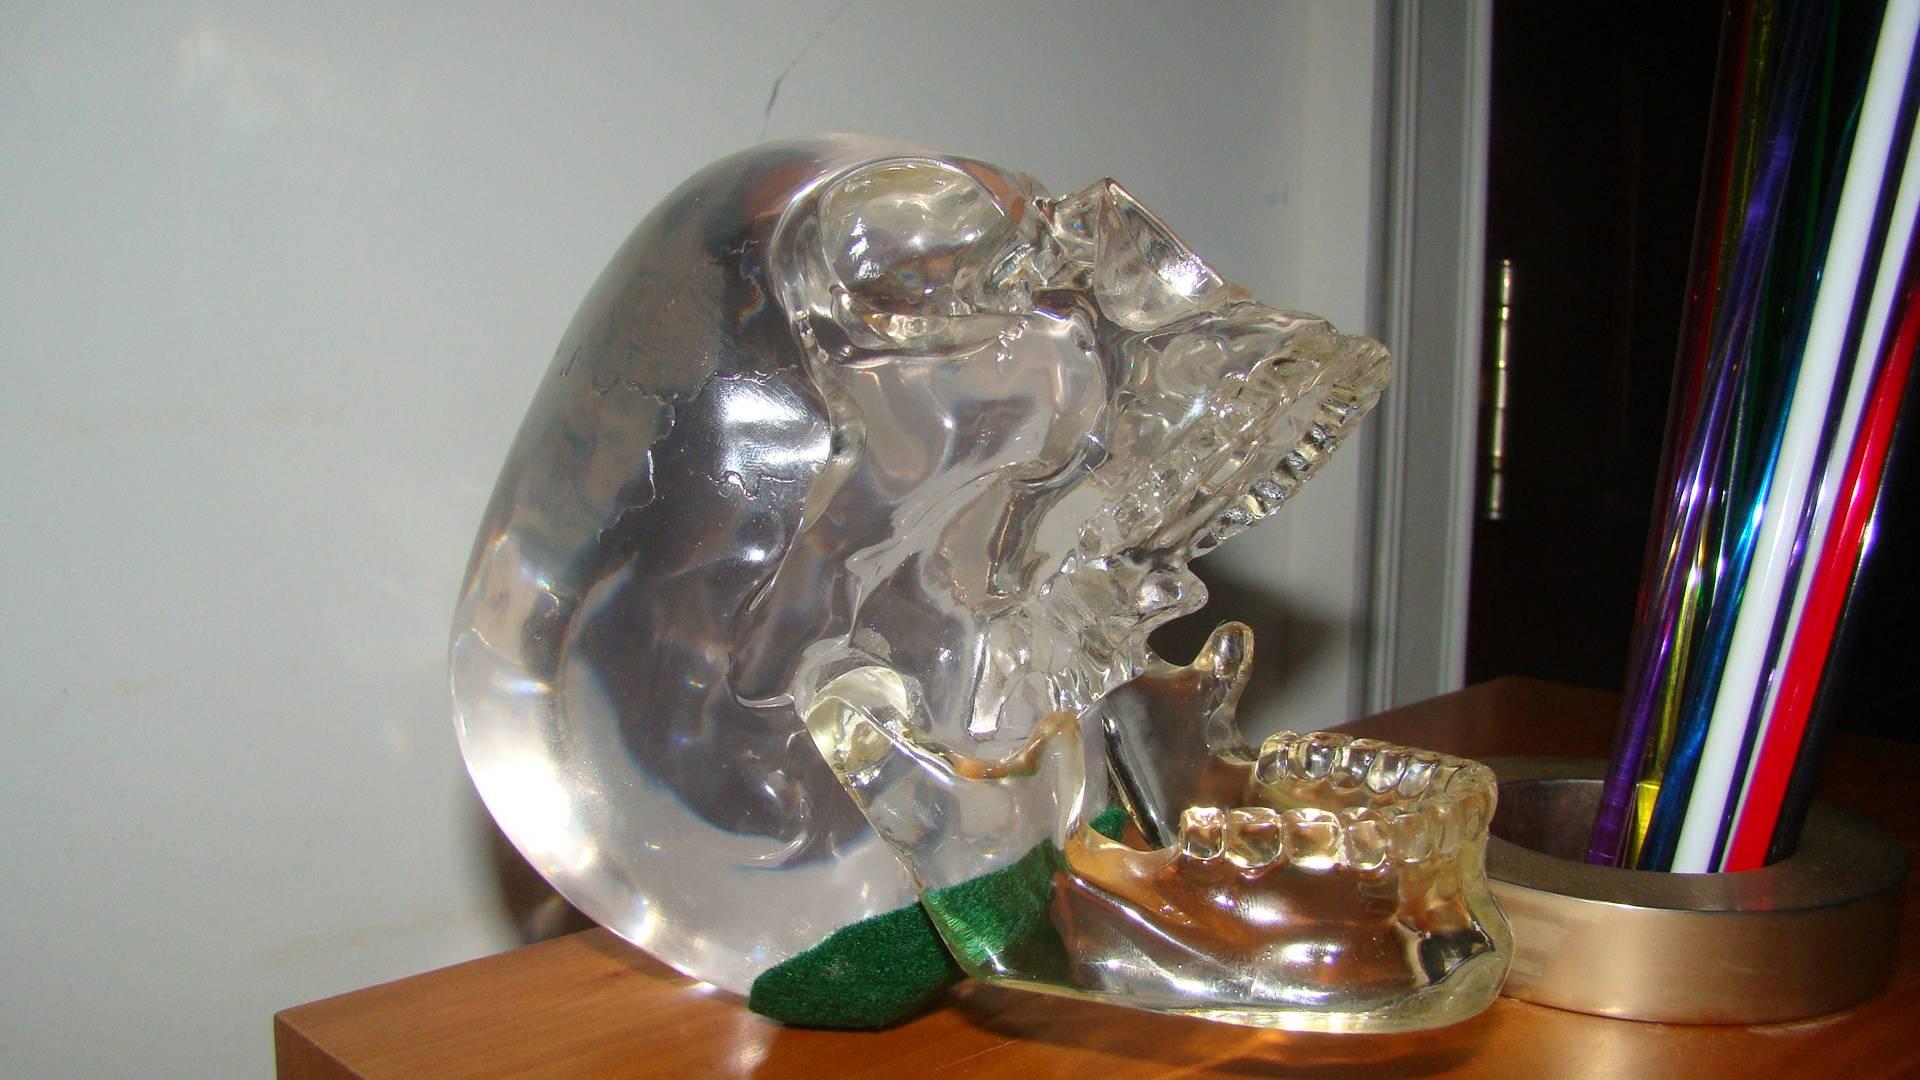 Terrific Mid-Century solid Lucite skull sculpture, circa 1970s. This interesting piece is comprised of clear Lucite with movable jaw. Said to have been sold by Harrods London. Great conversation piece for your desk.